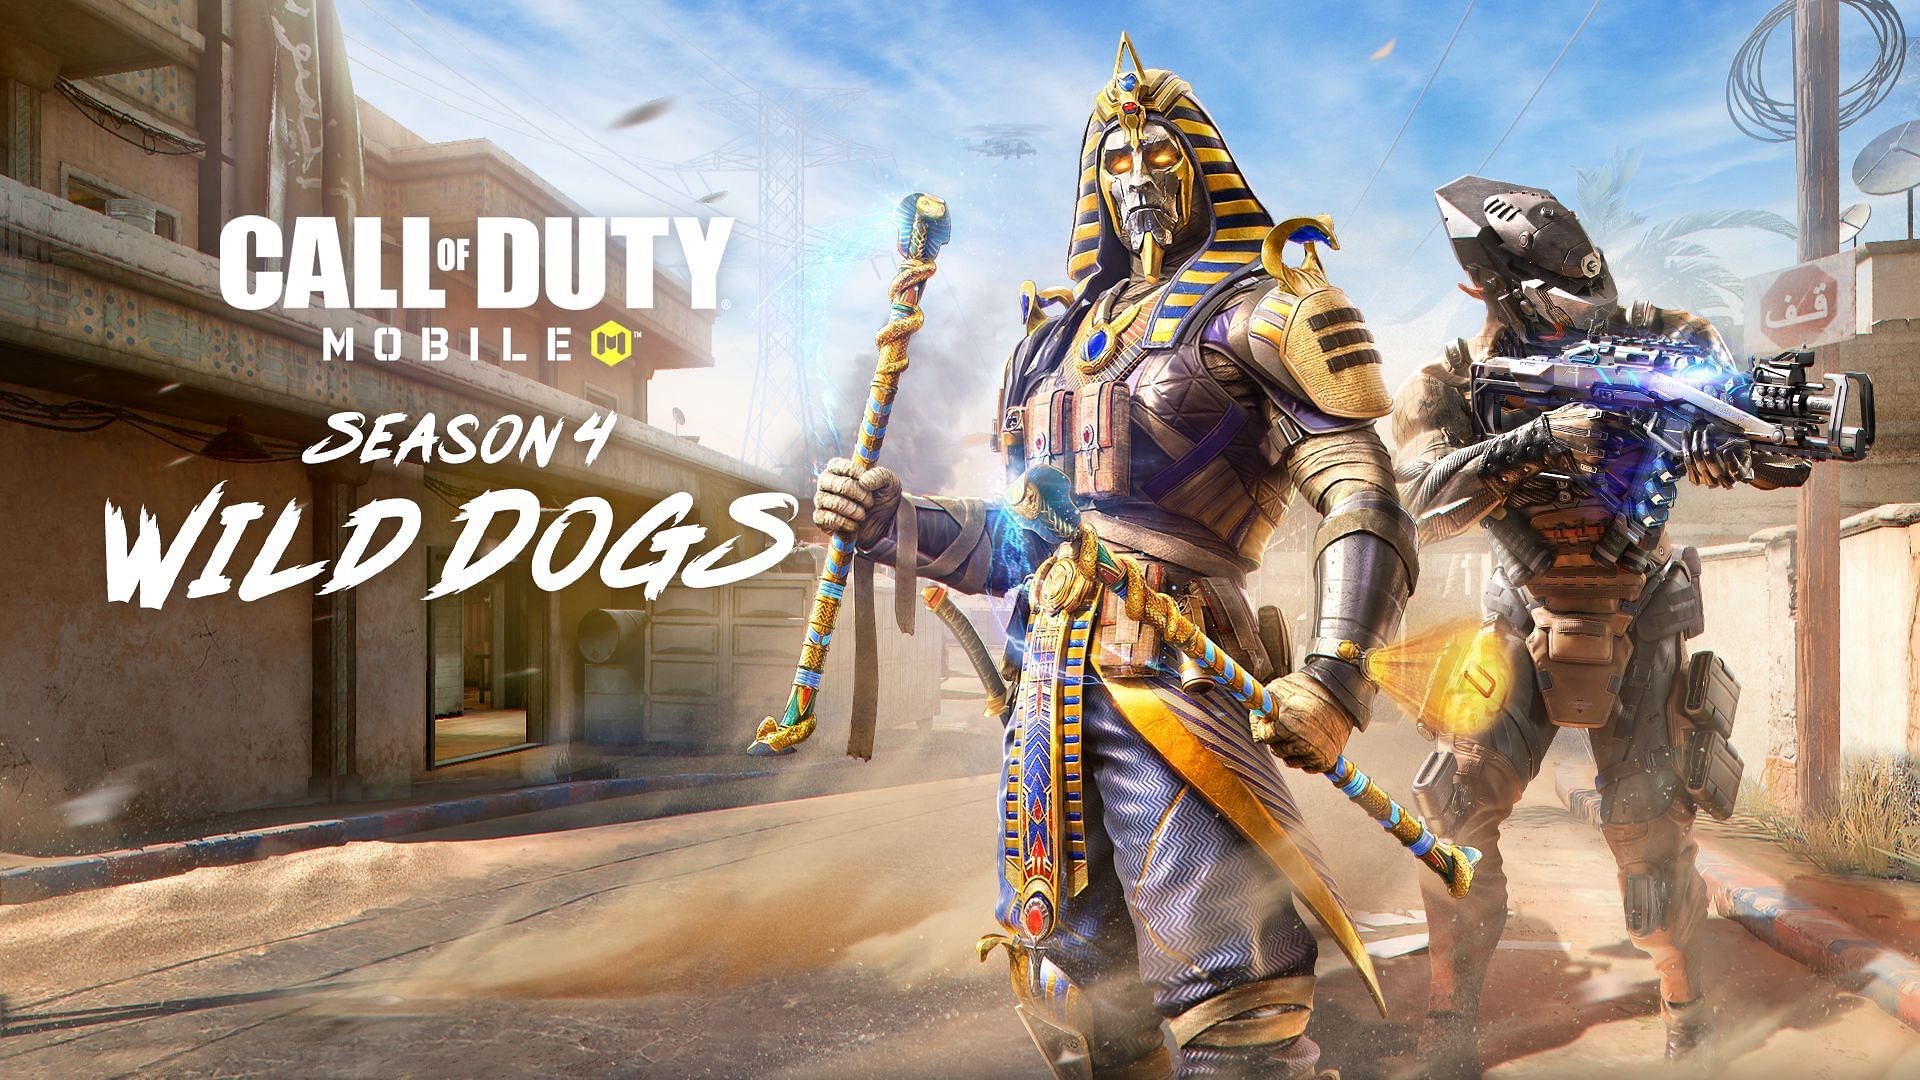 COD Mobile to release Legendary Phantom and first legendary melee weapon